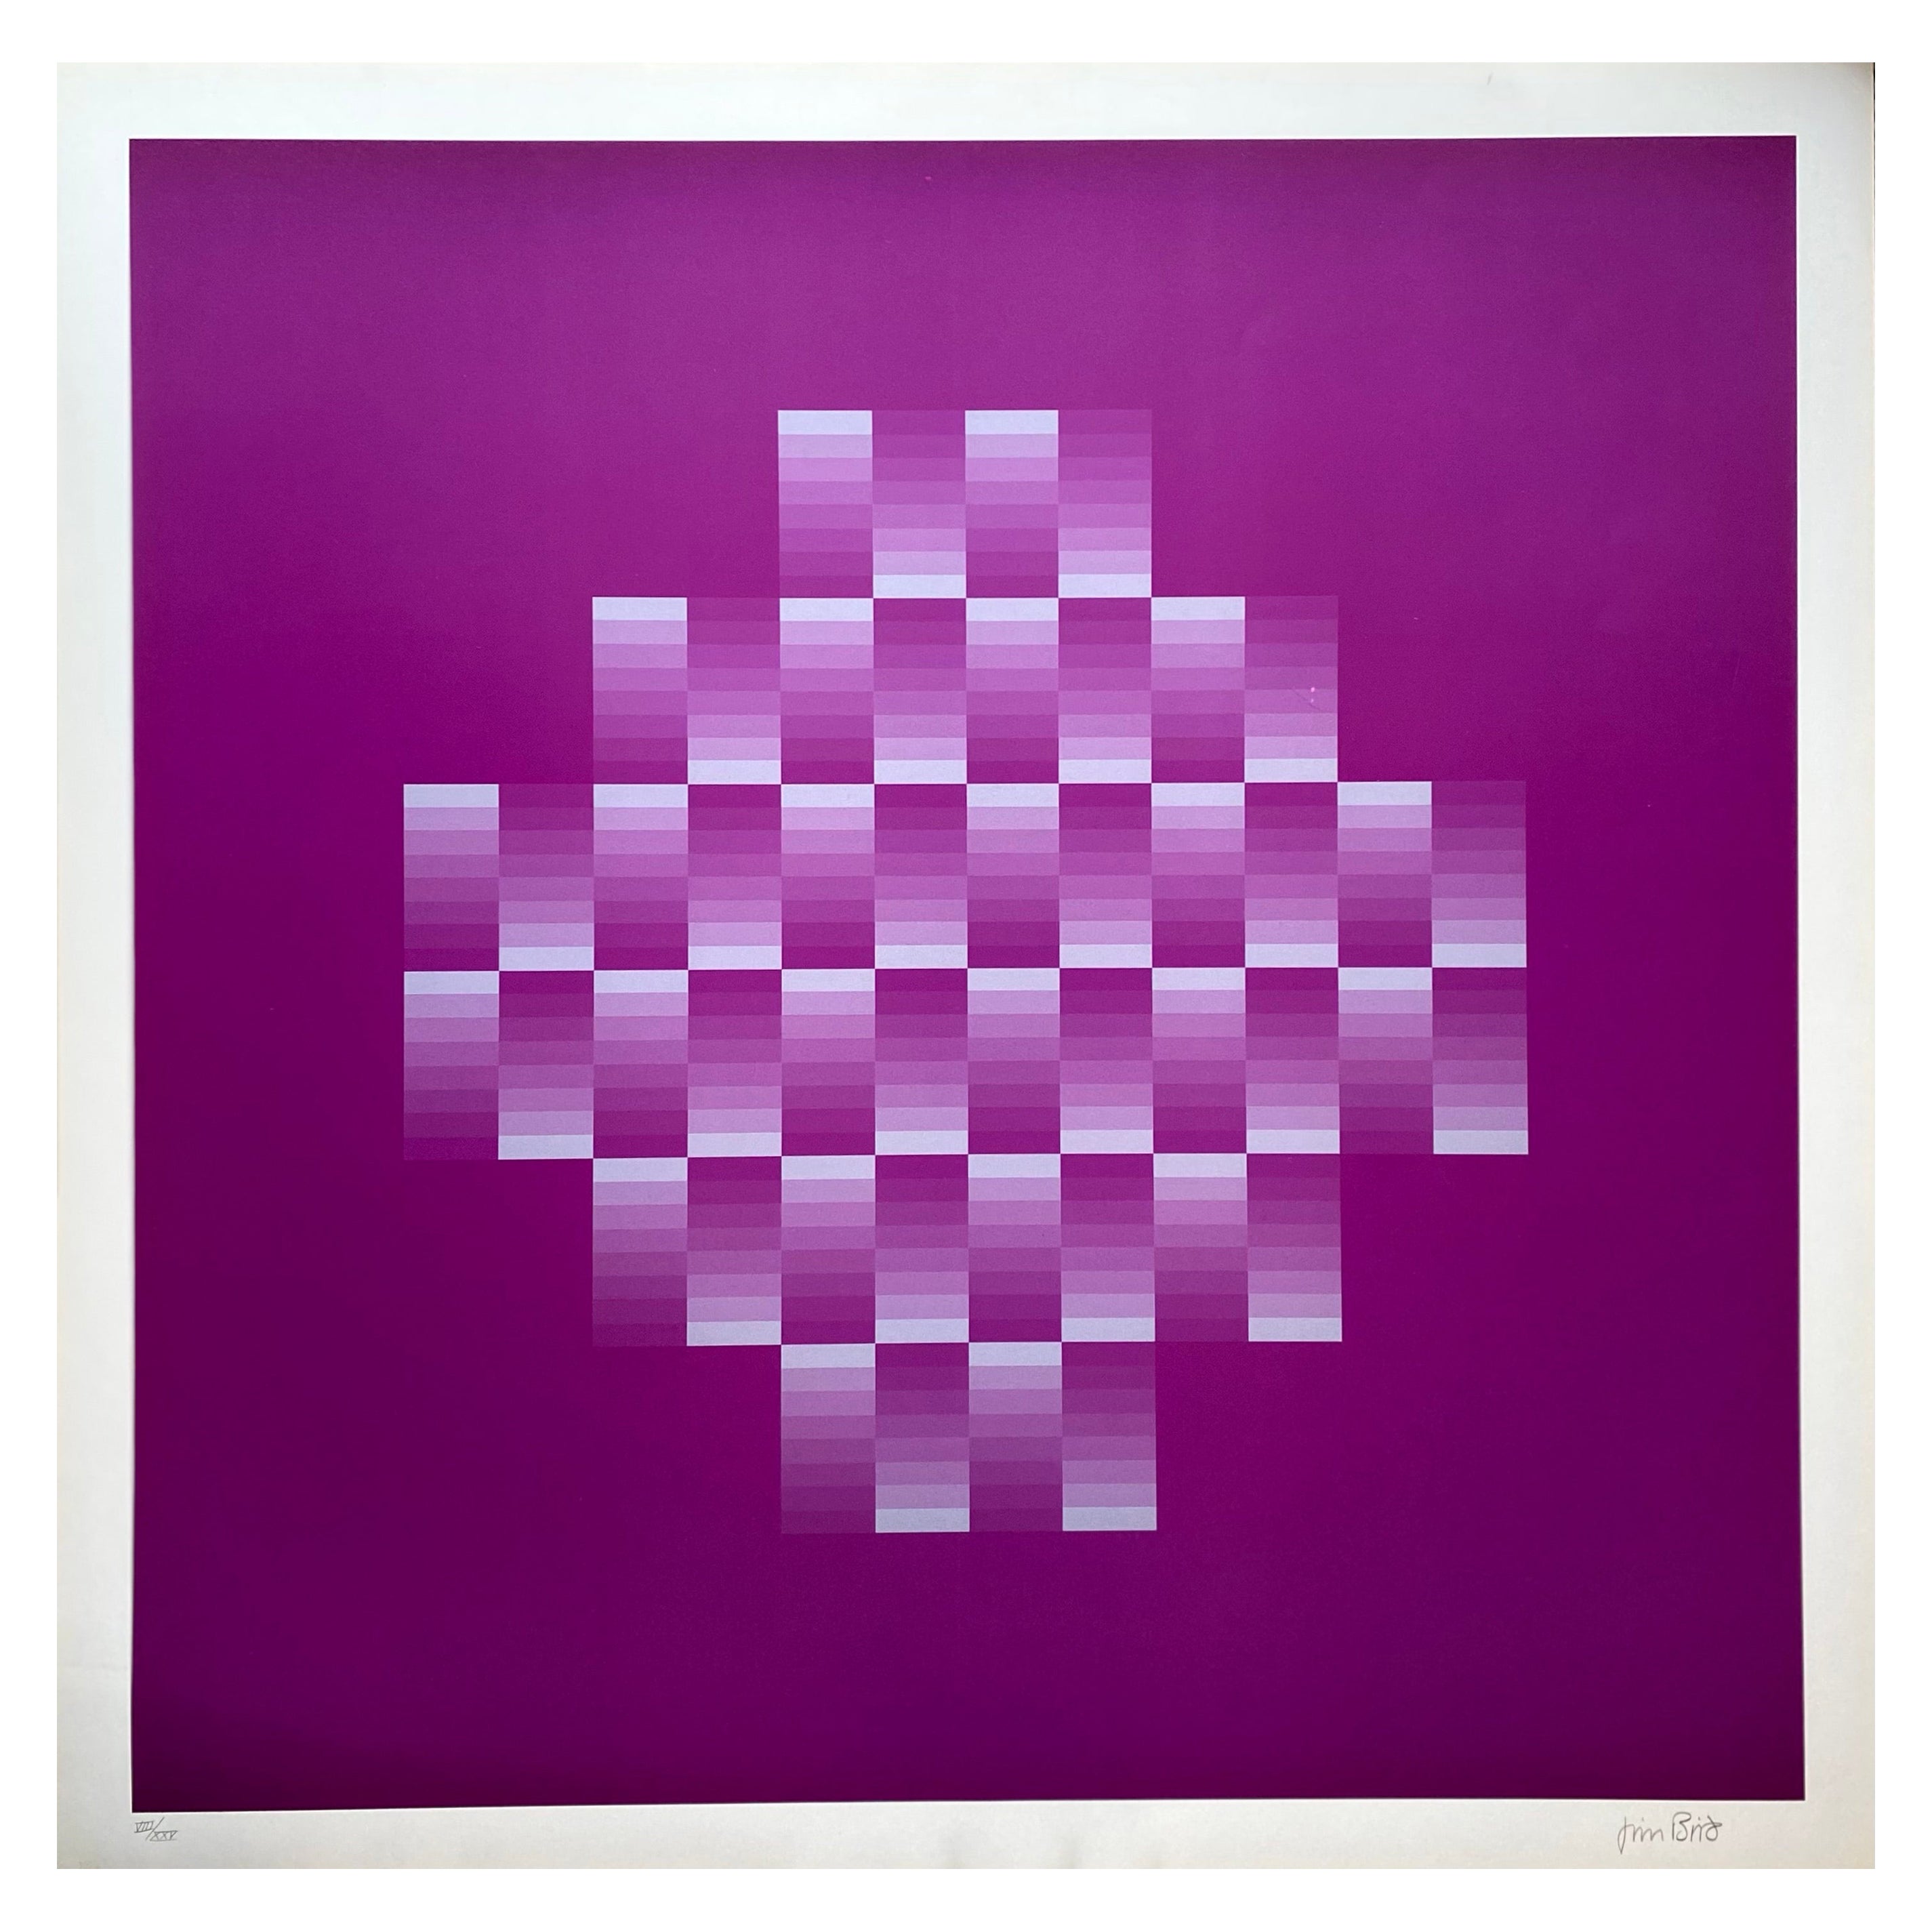 Jim Bird, Tribute to Vasarely 10, 1970 For Sale